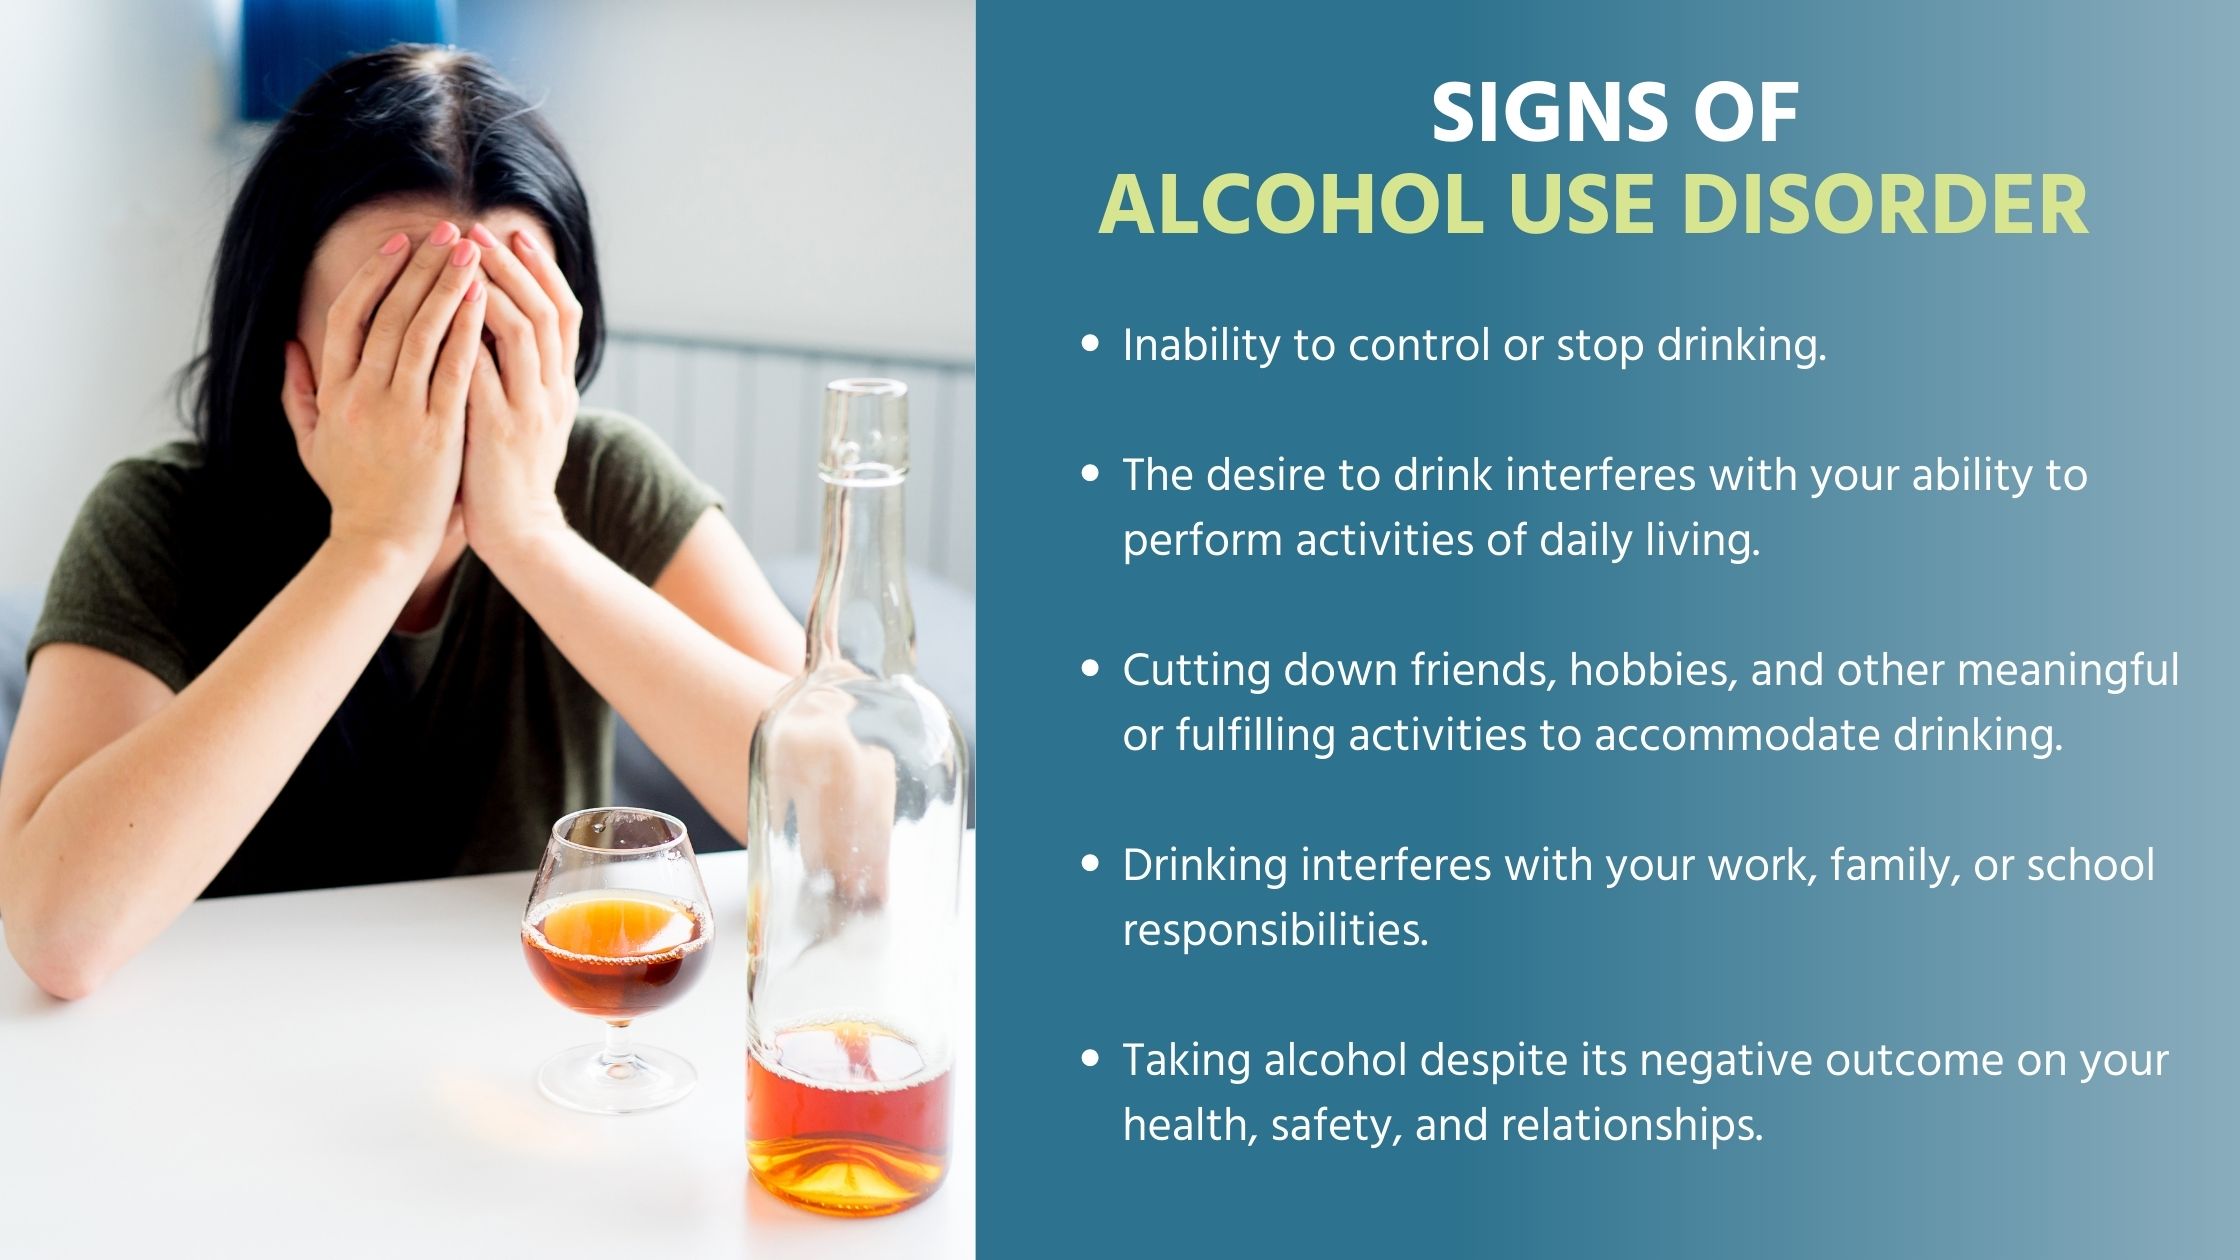 Signs of Alcohol Use Disorder